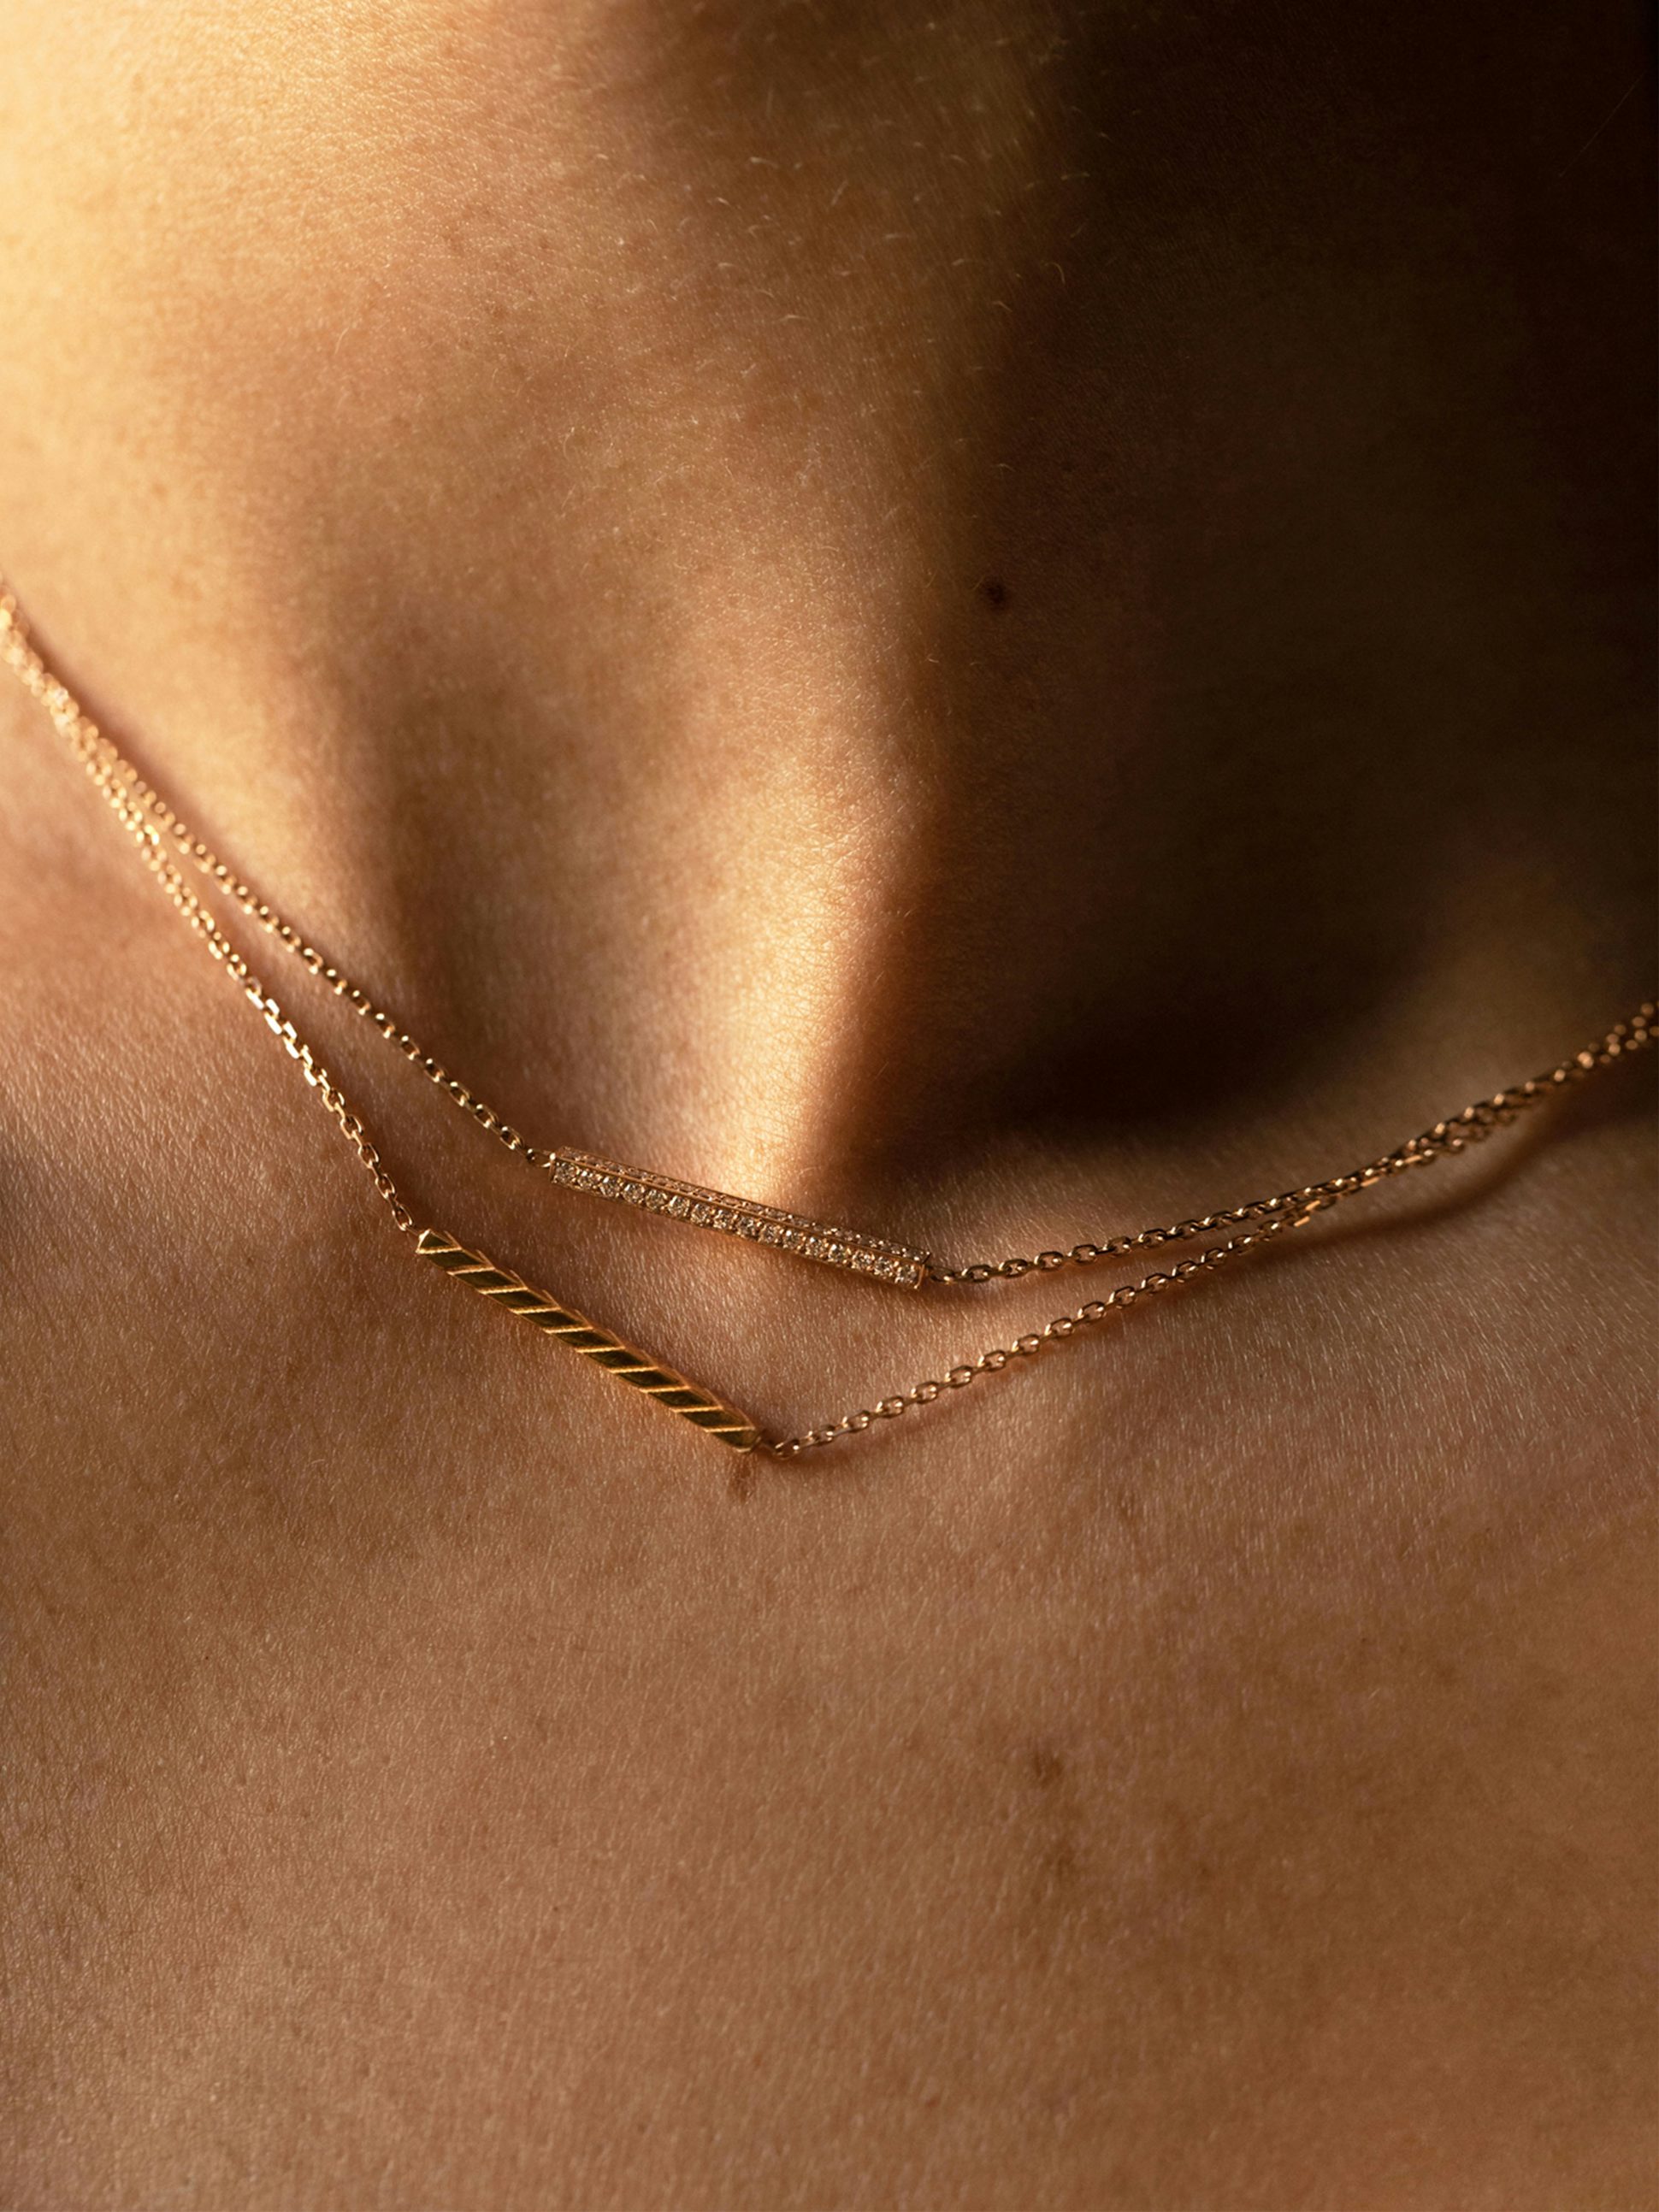 Anagramme grooved motif in yellow gold 18k Fairmined ethical, on 42 cm chain